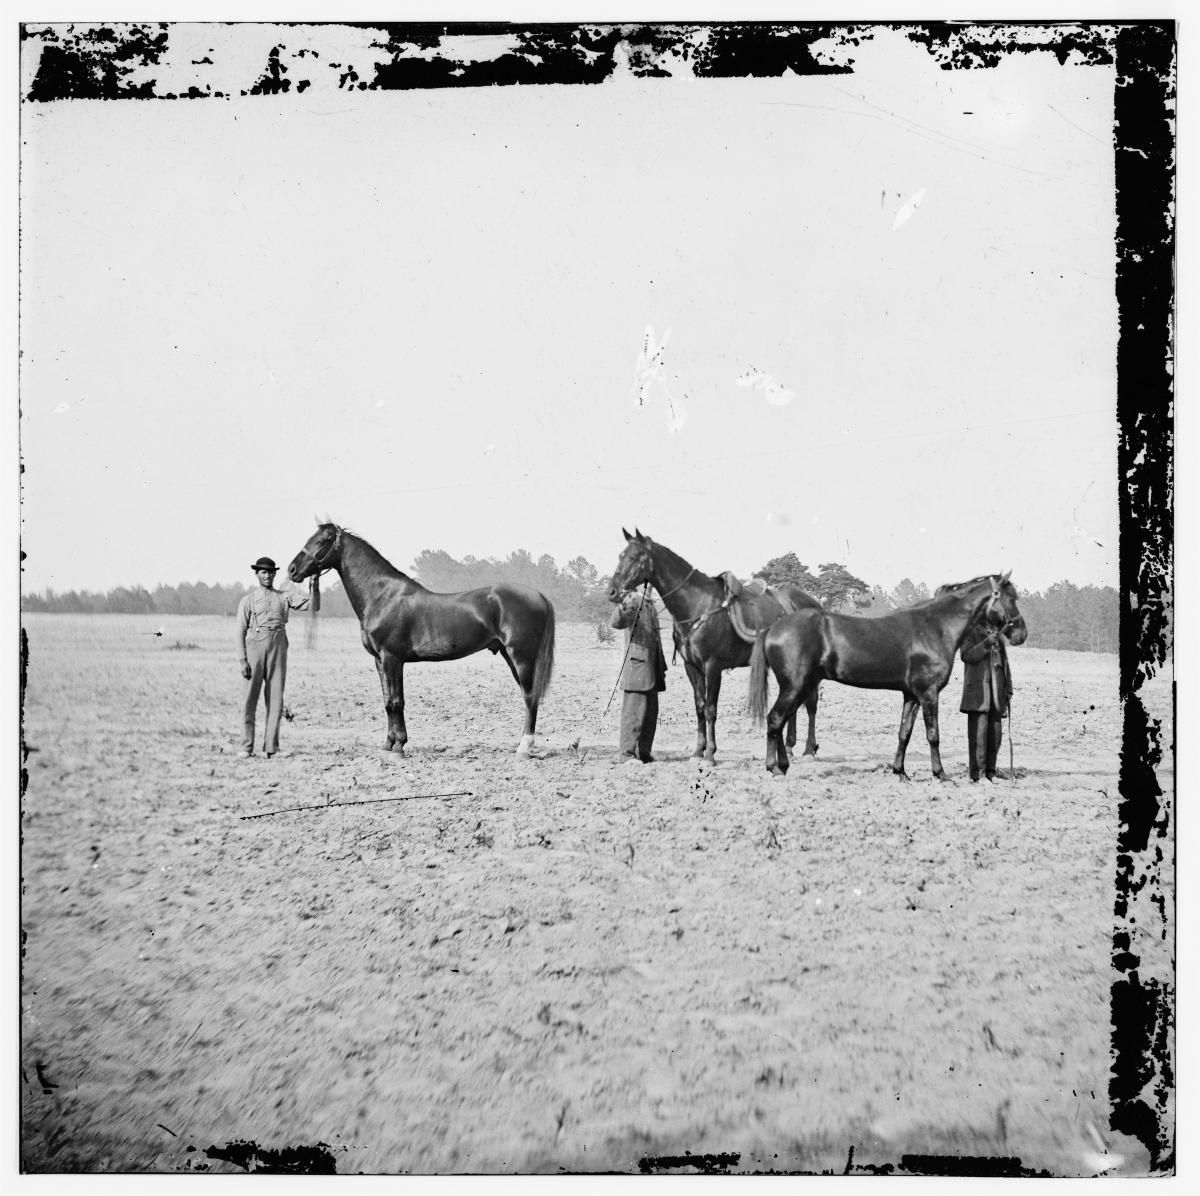 Grant as a young man, in a field with three horses